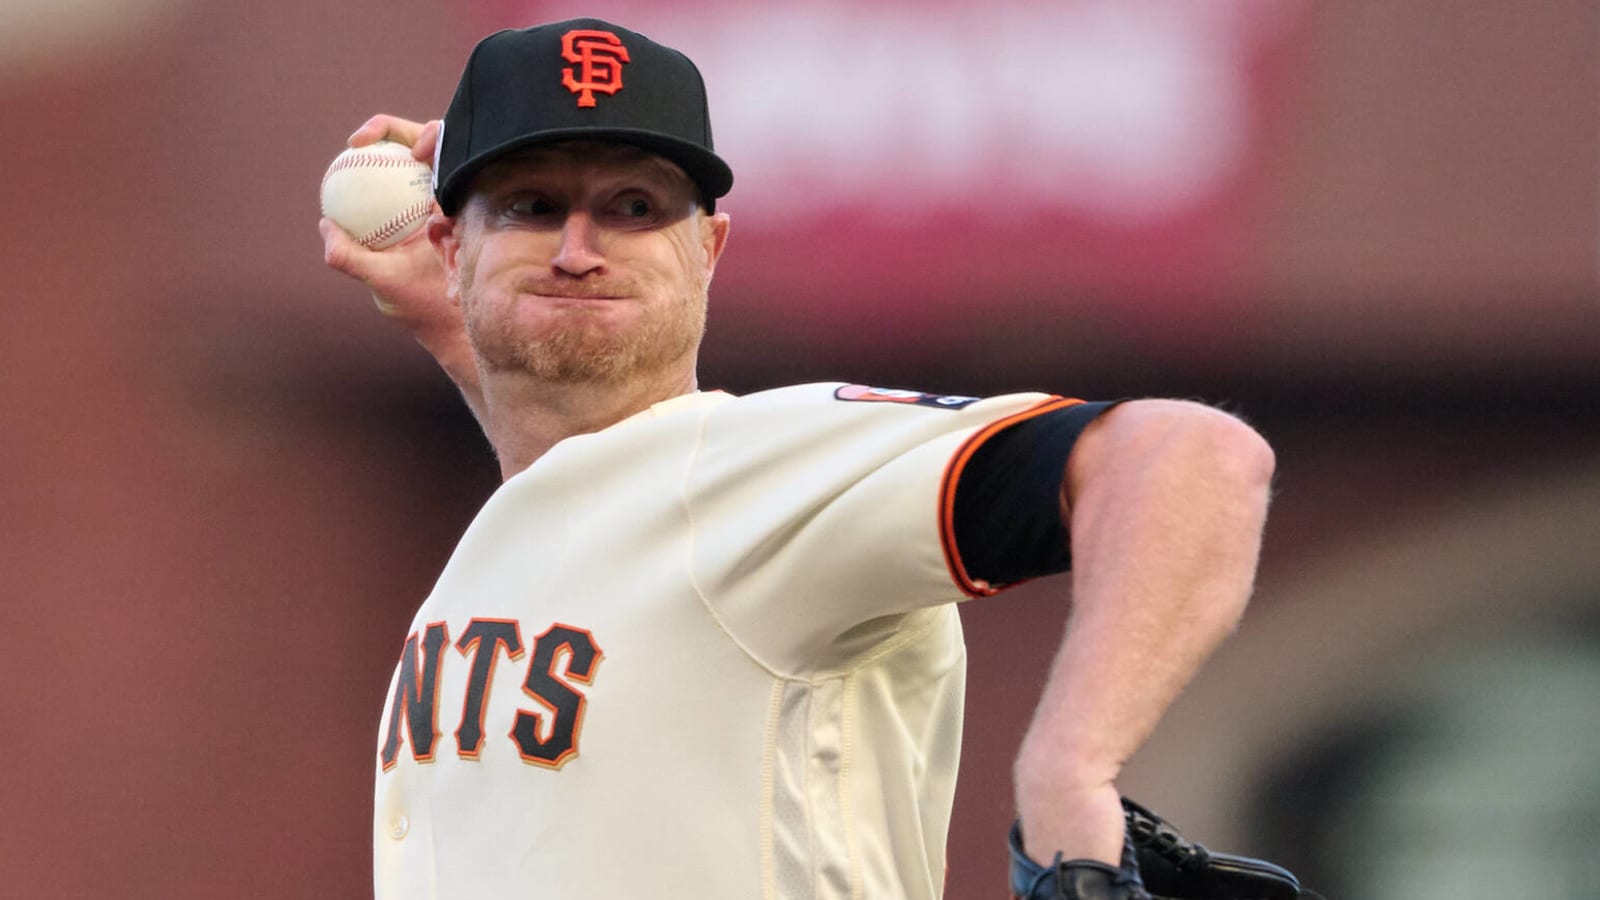 Giants All-Star pitcher suffers setback in recovery from injury